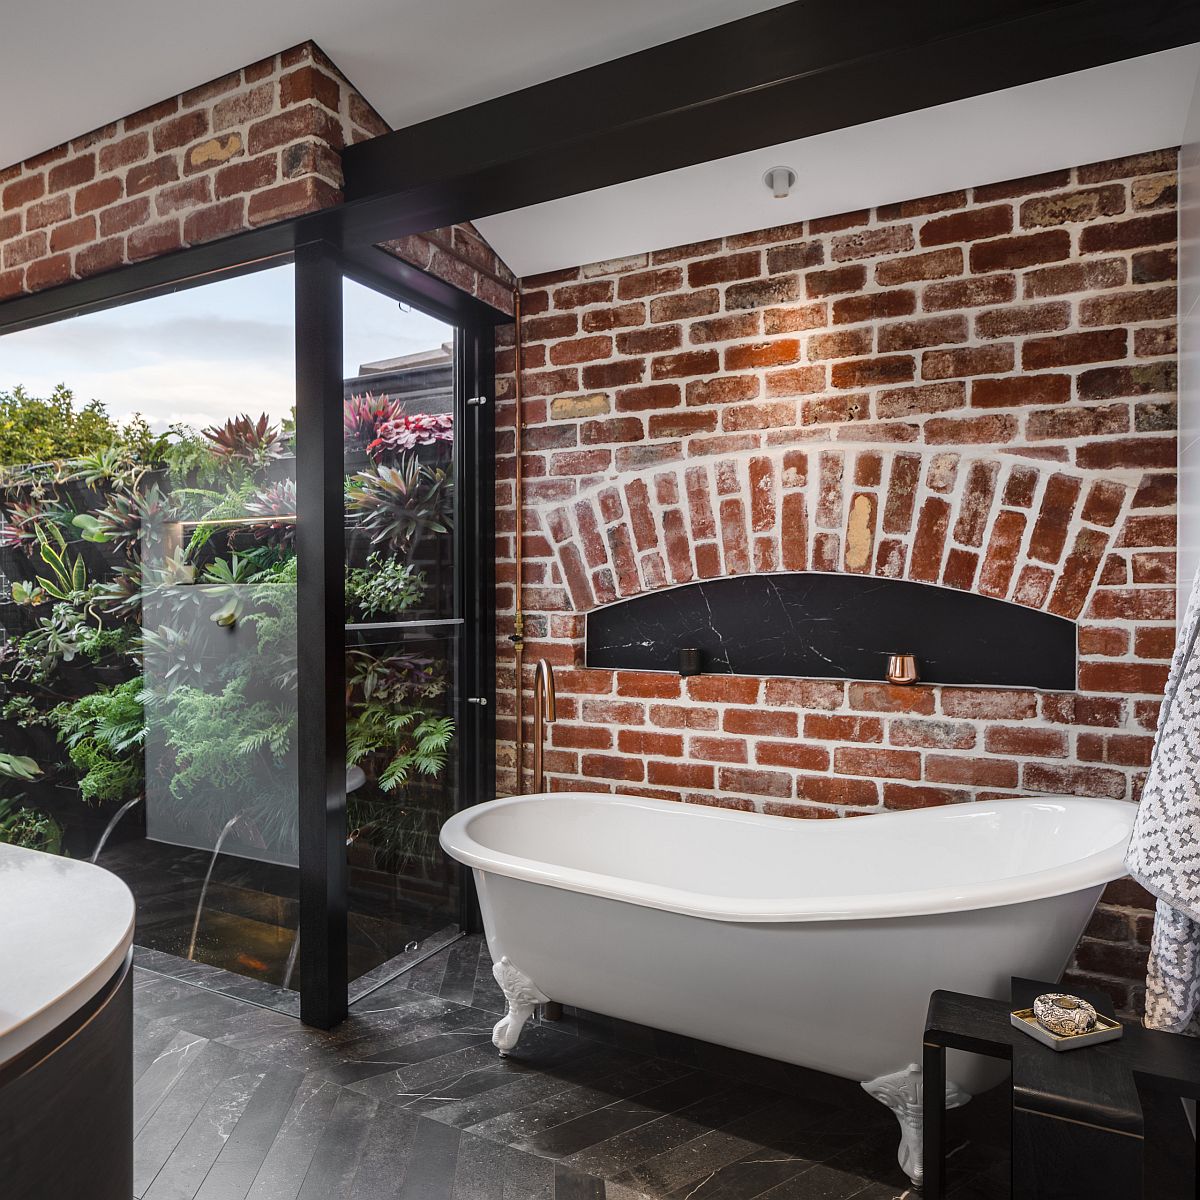 Modern industrial bathroom with a brick wall backdrop and lovely black accents